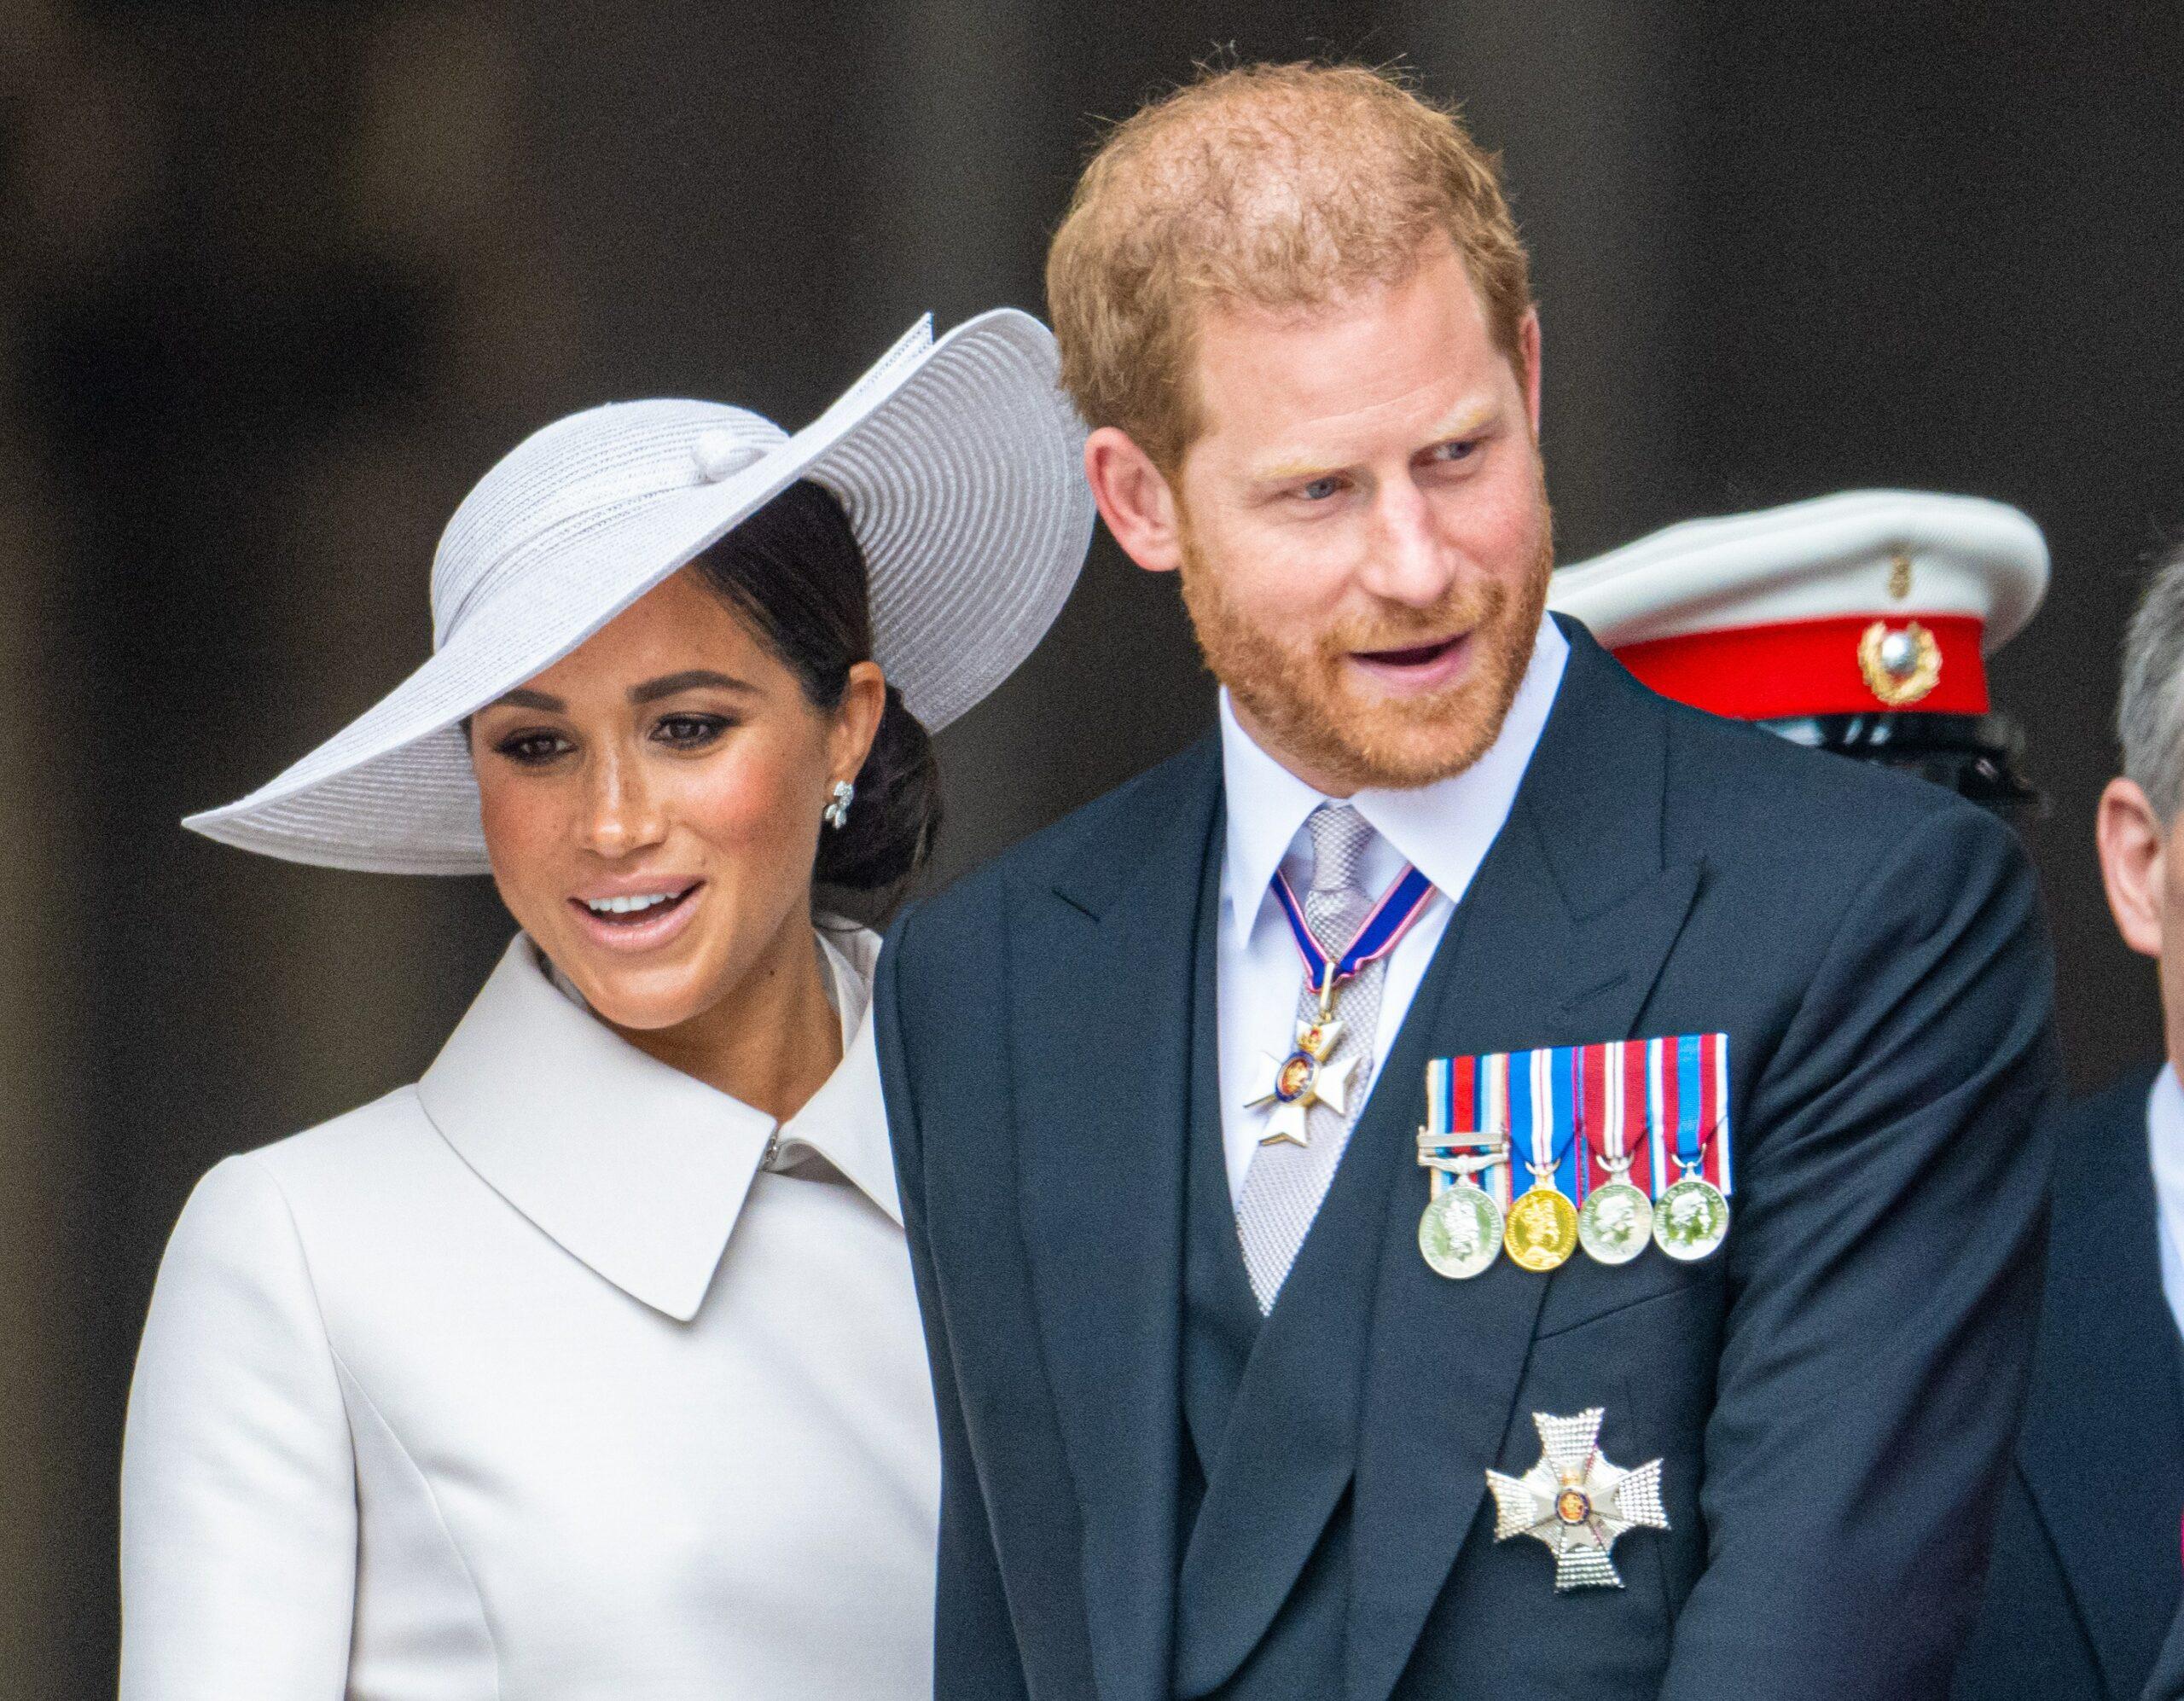 Prince Harry Duke of Sussex and Meghan Markle Duchess of Sussex attending the Service of Thanksgiving for the Queen, marking the monarch's 70 year Platinum Jubilee, at St Paul’s Cathedral in London. 03 Jun 2022